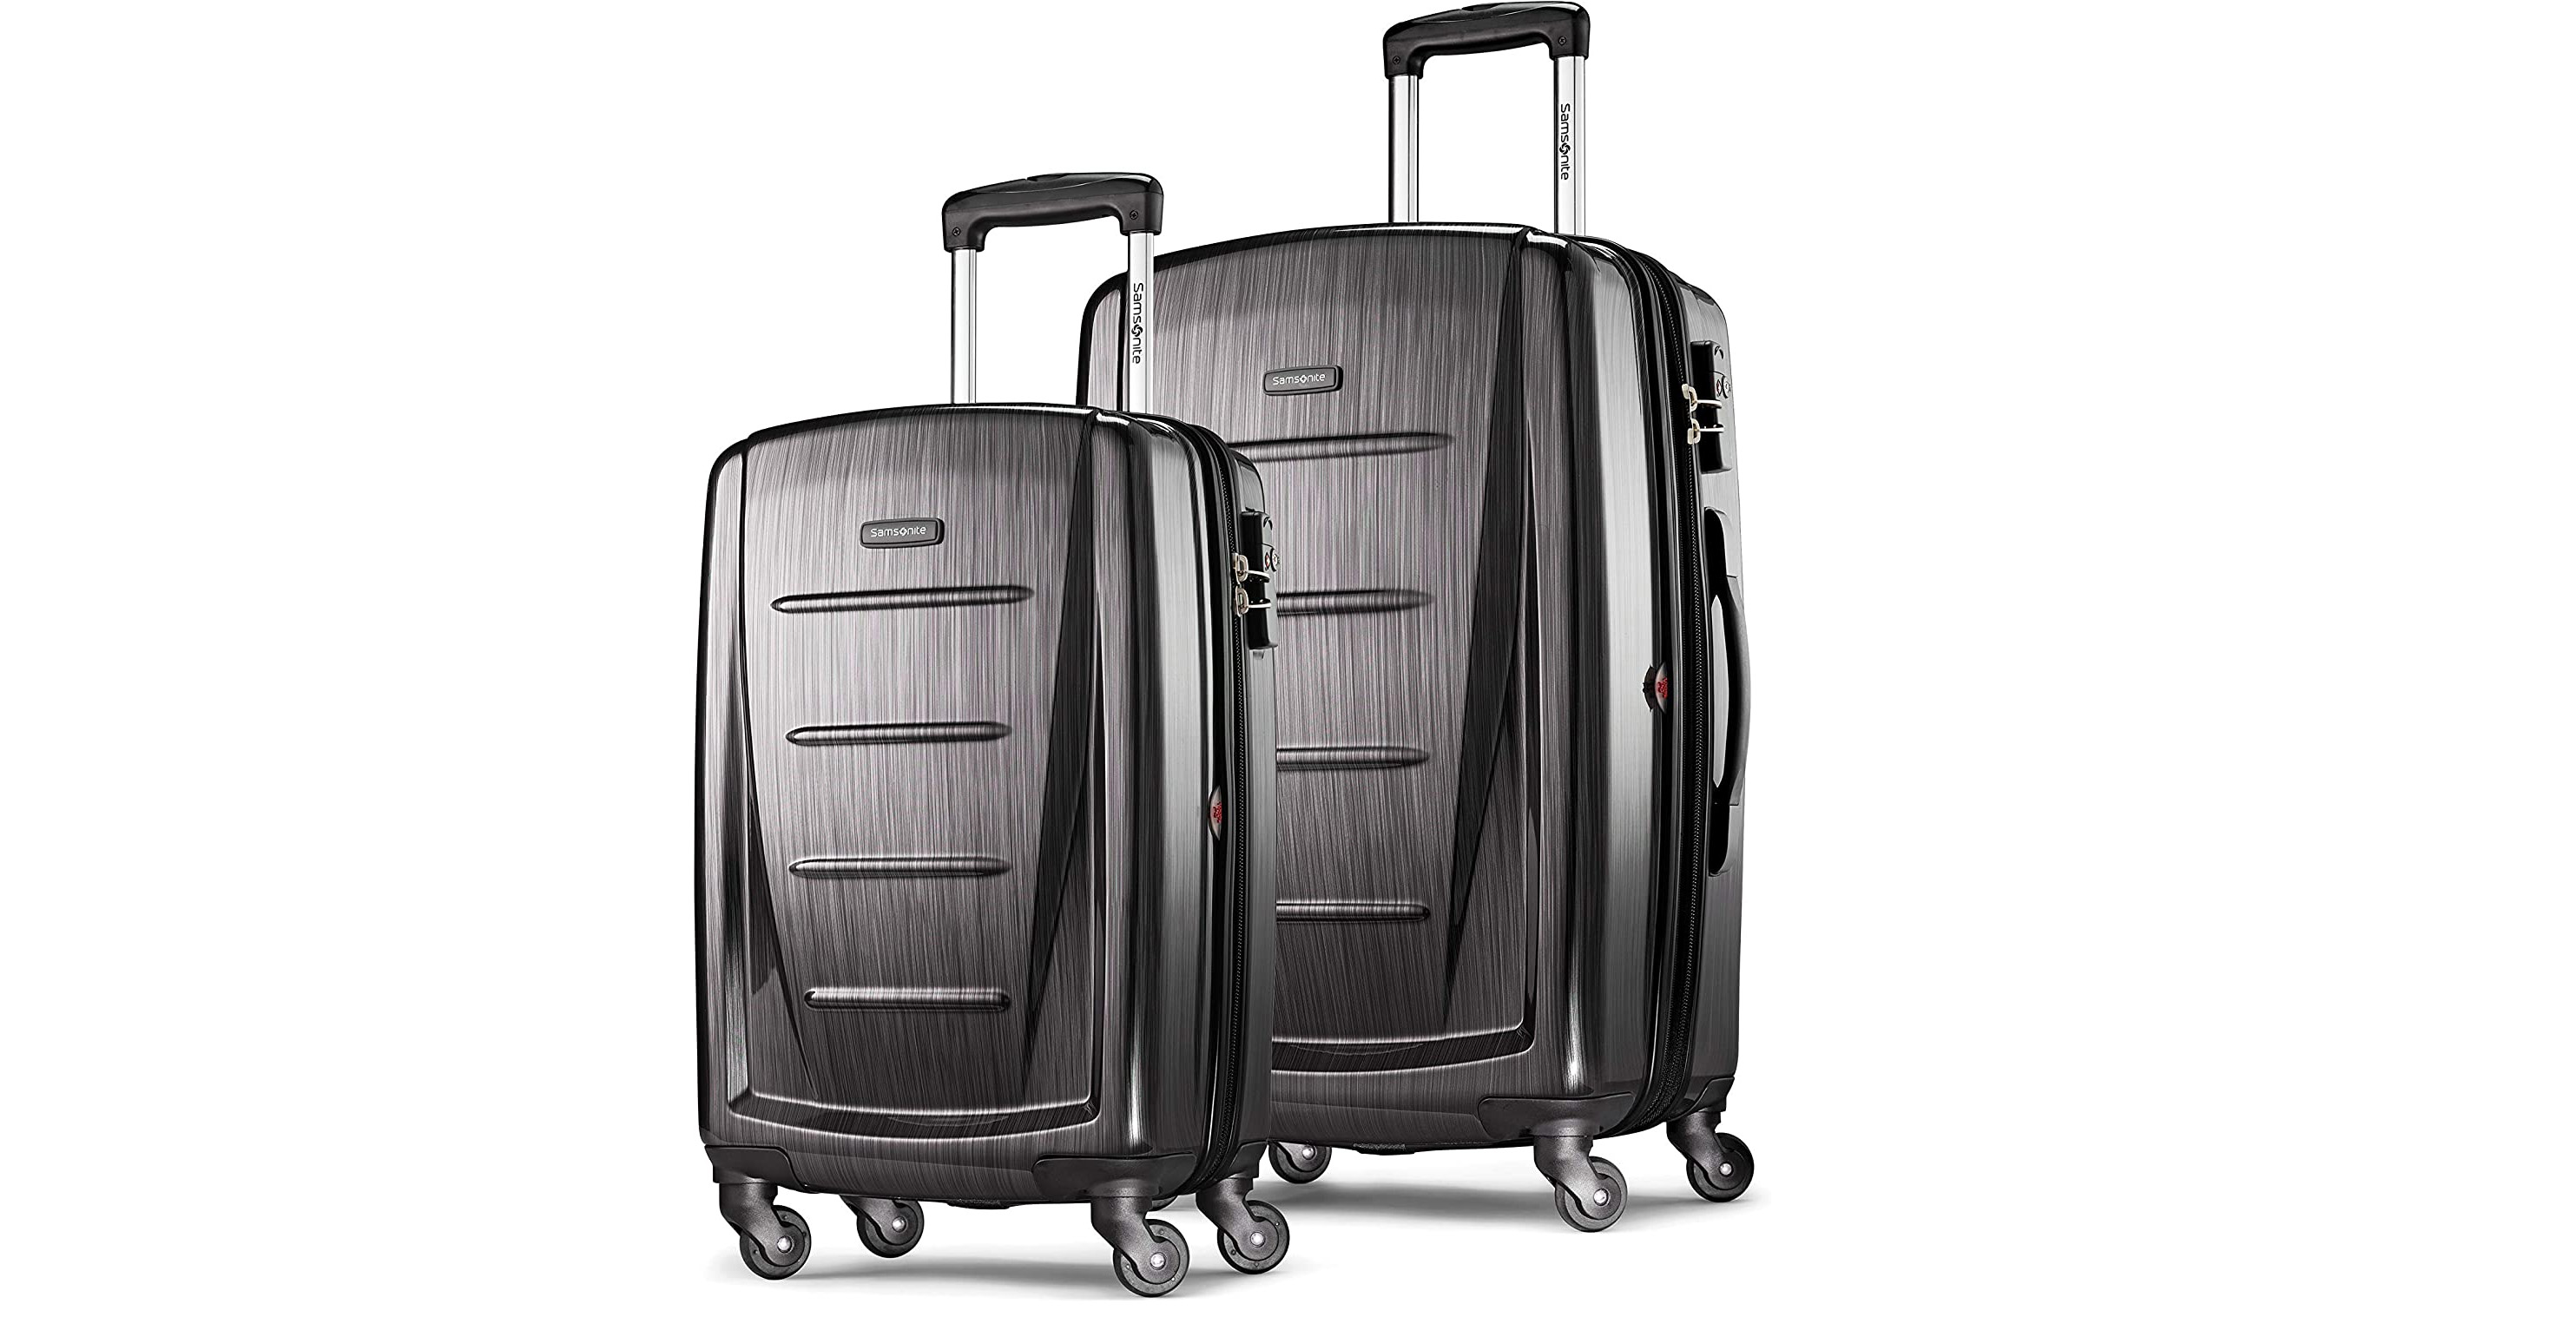 Amazon Prime Day Luggage Deals are live! Save up to 60 off Samsonite, more